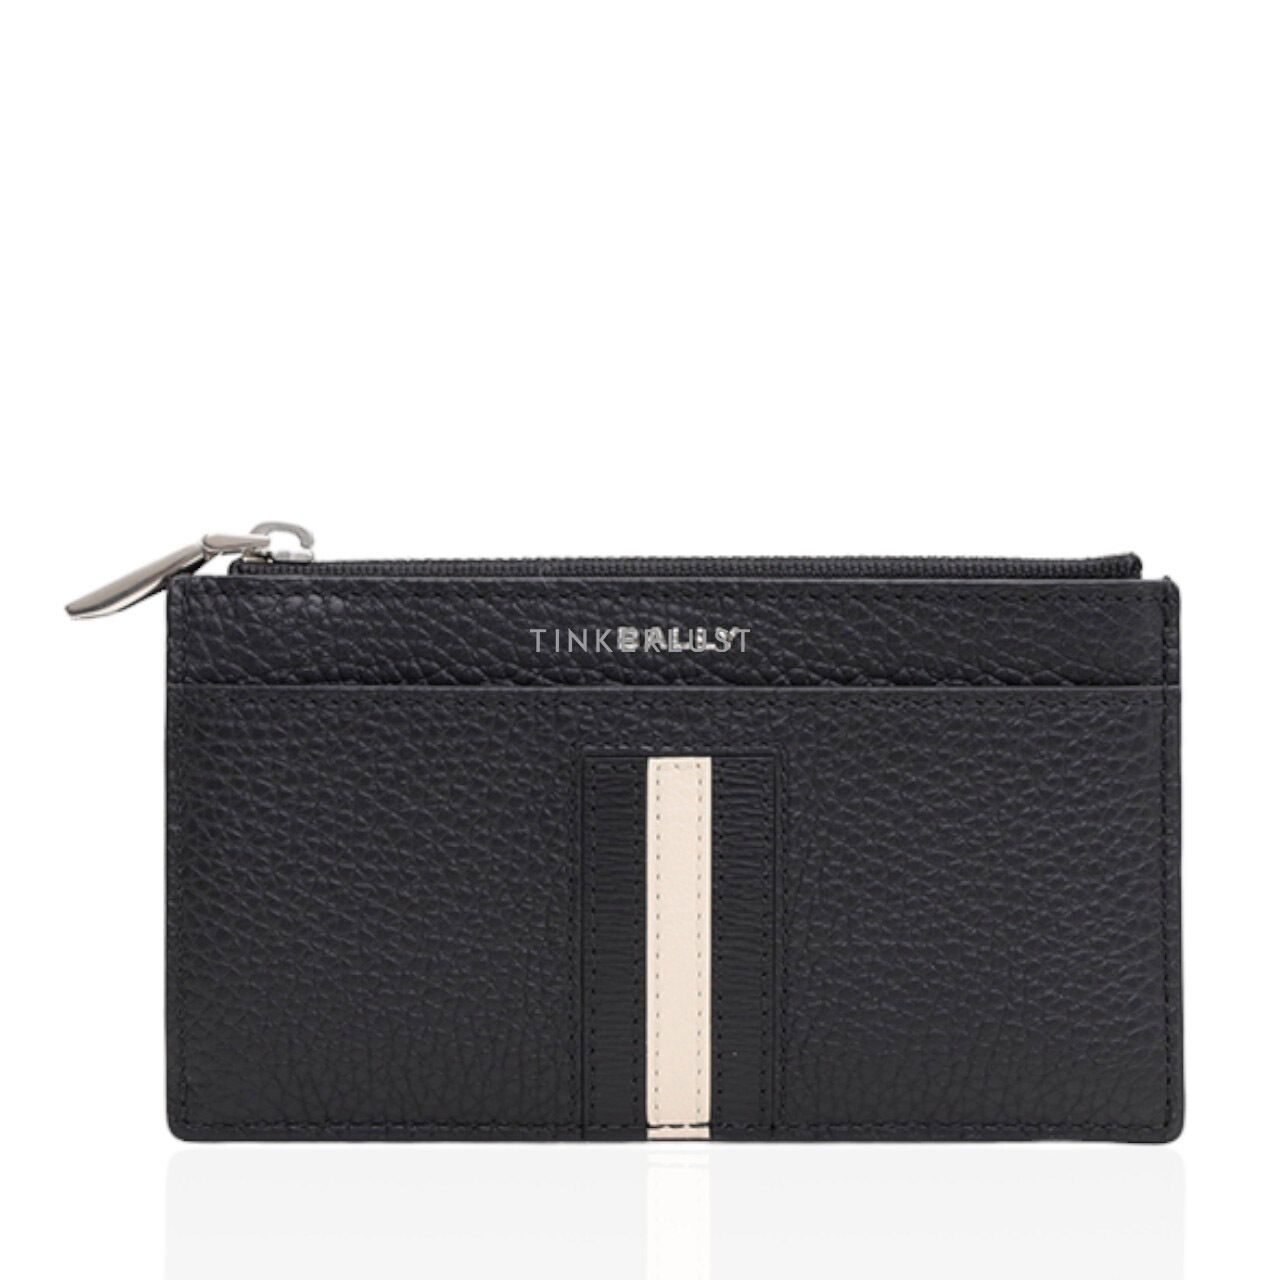 Bally Ribbon Business Card Holder in Black Grained Leather Wallet